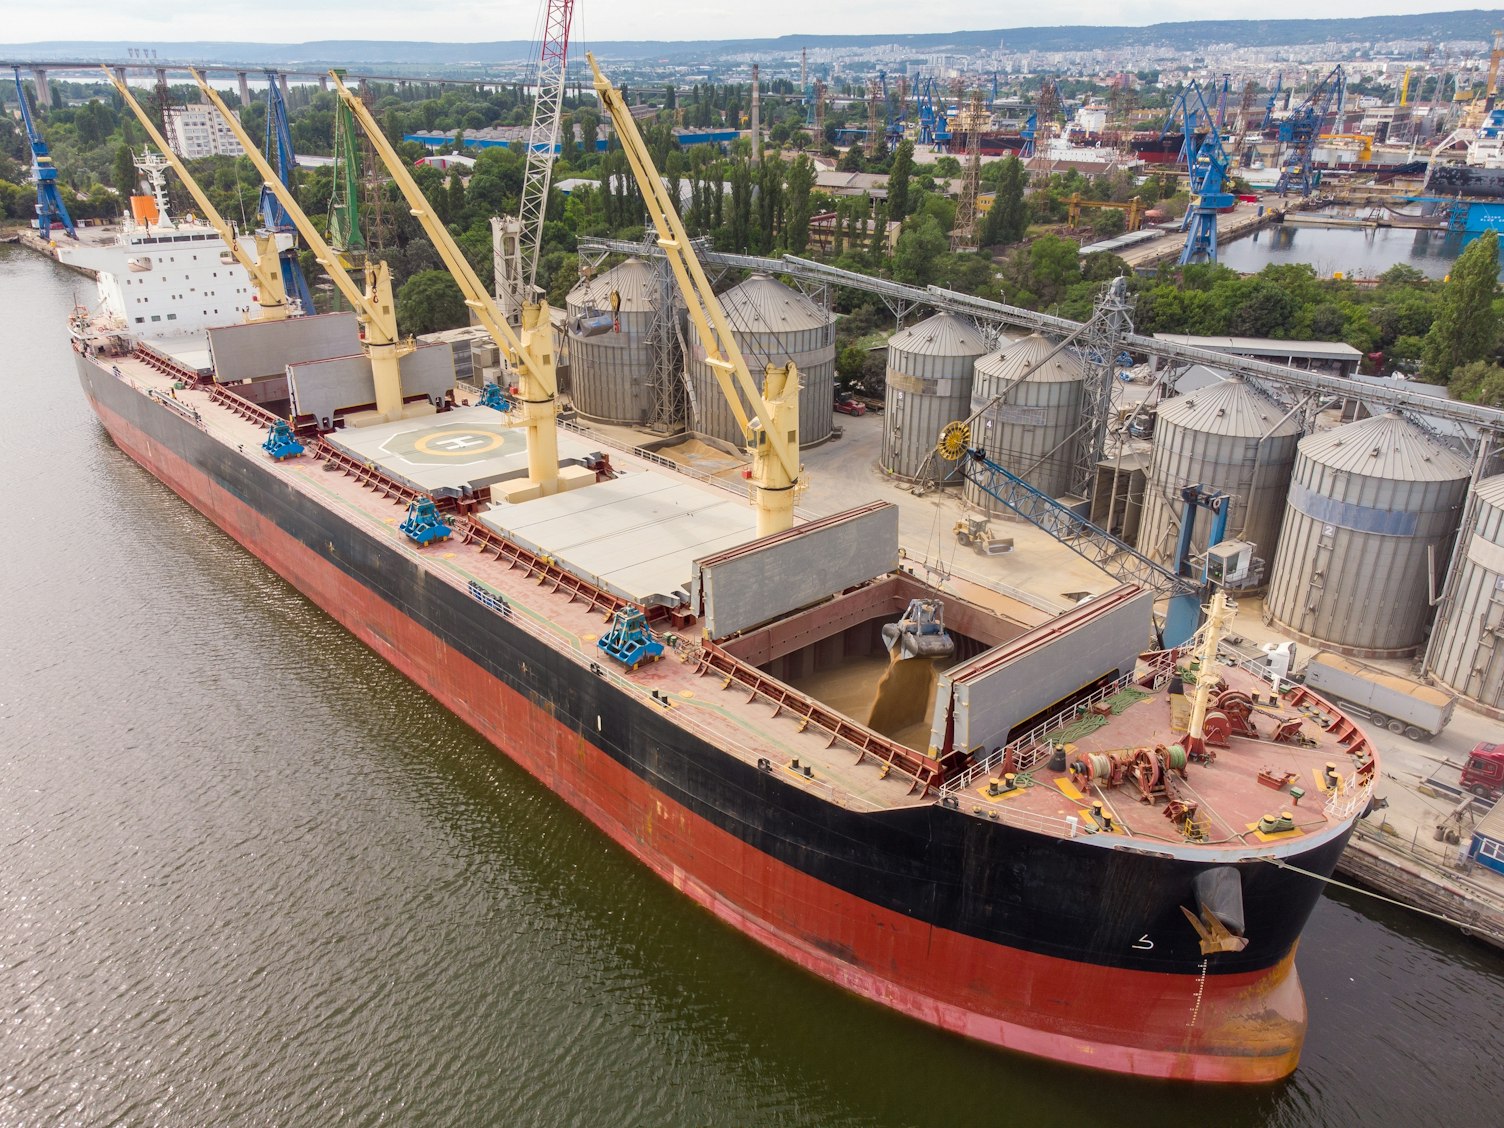 Loading grain into holds of sea cargo vessel in seaport from silos of grain storage